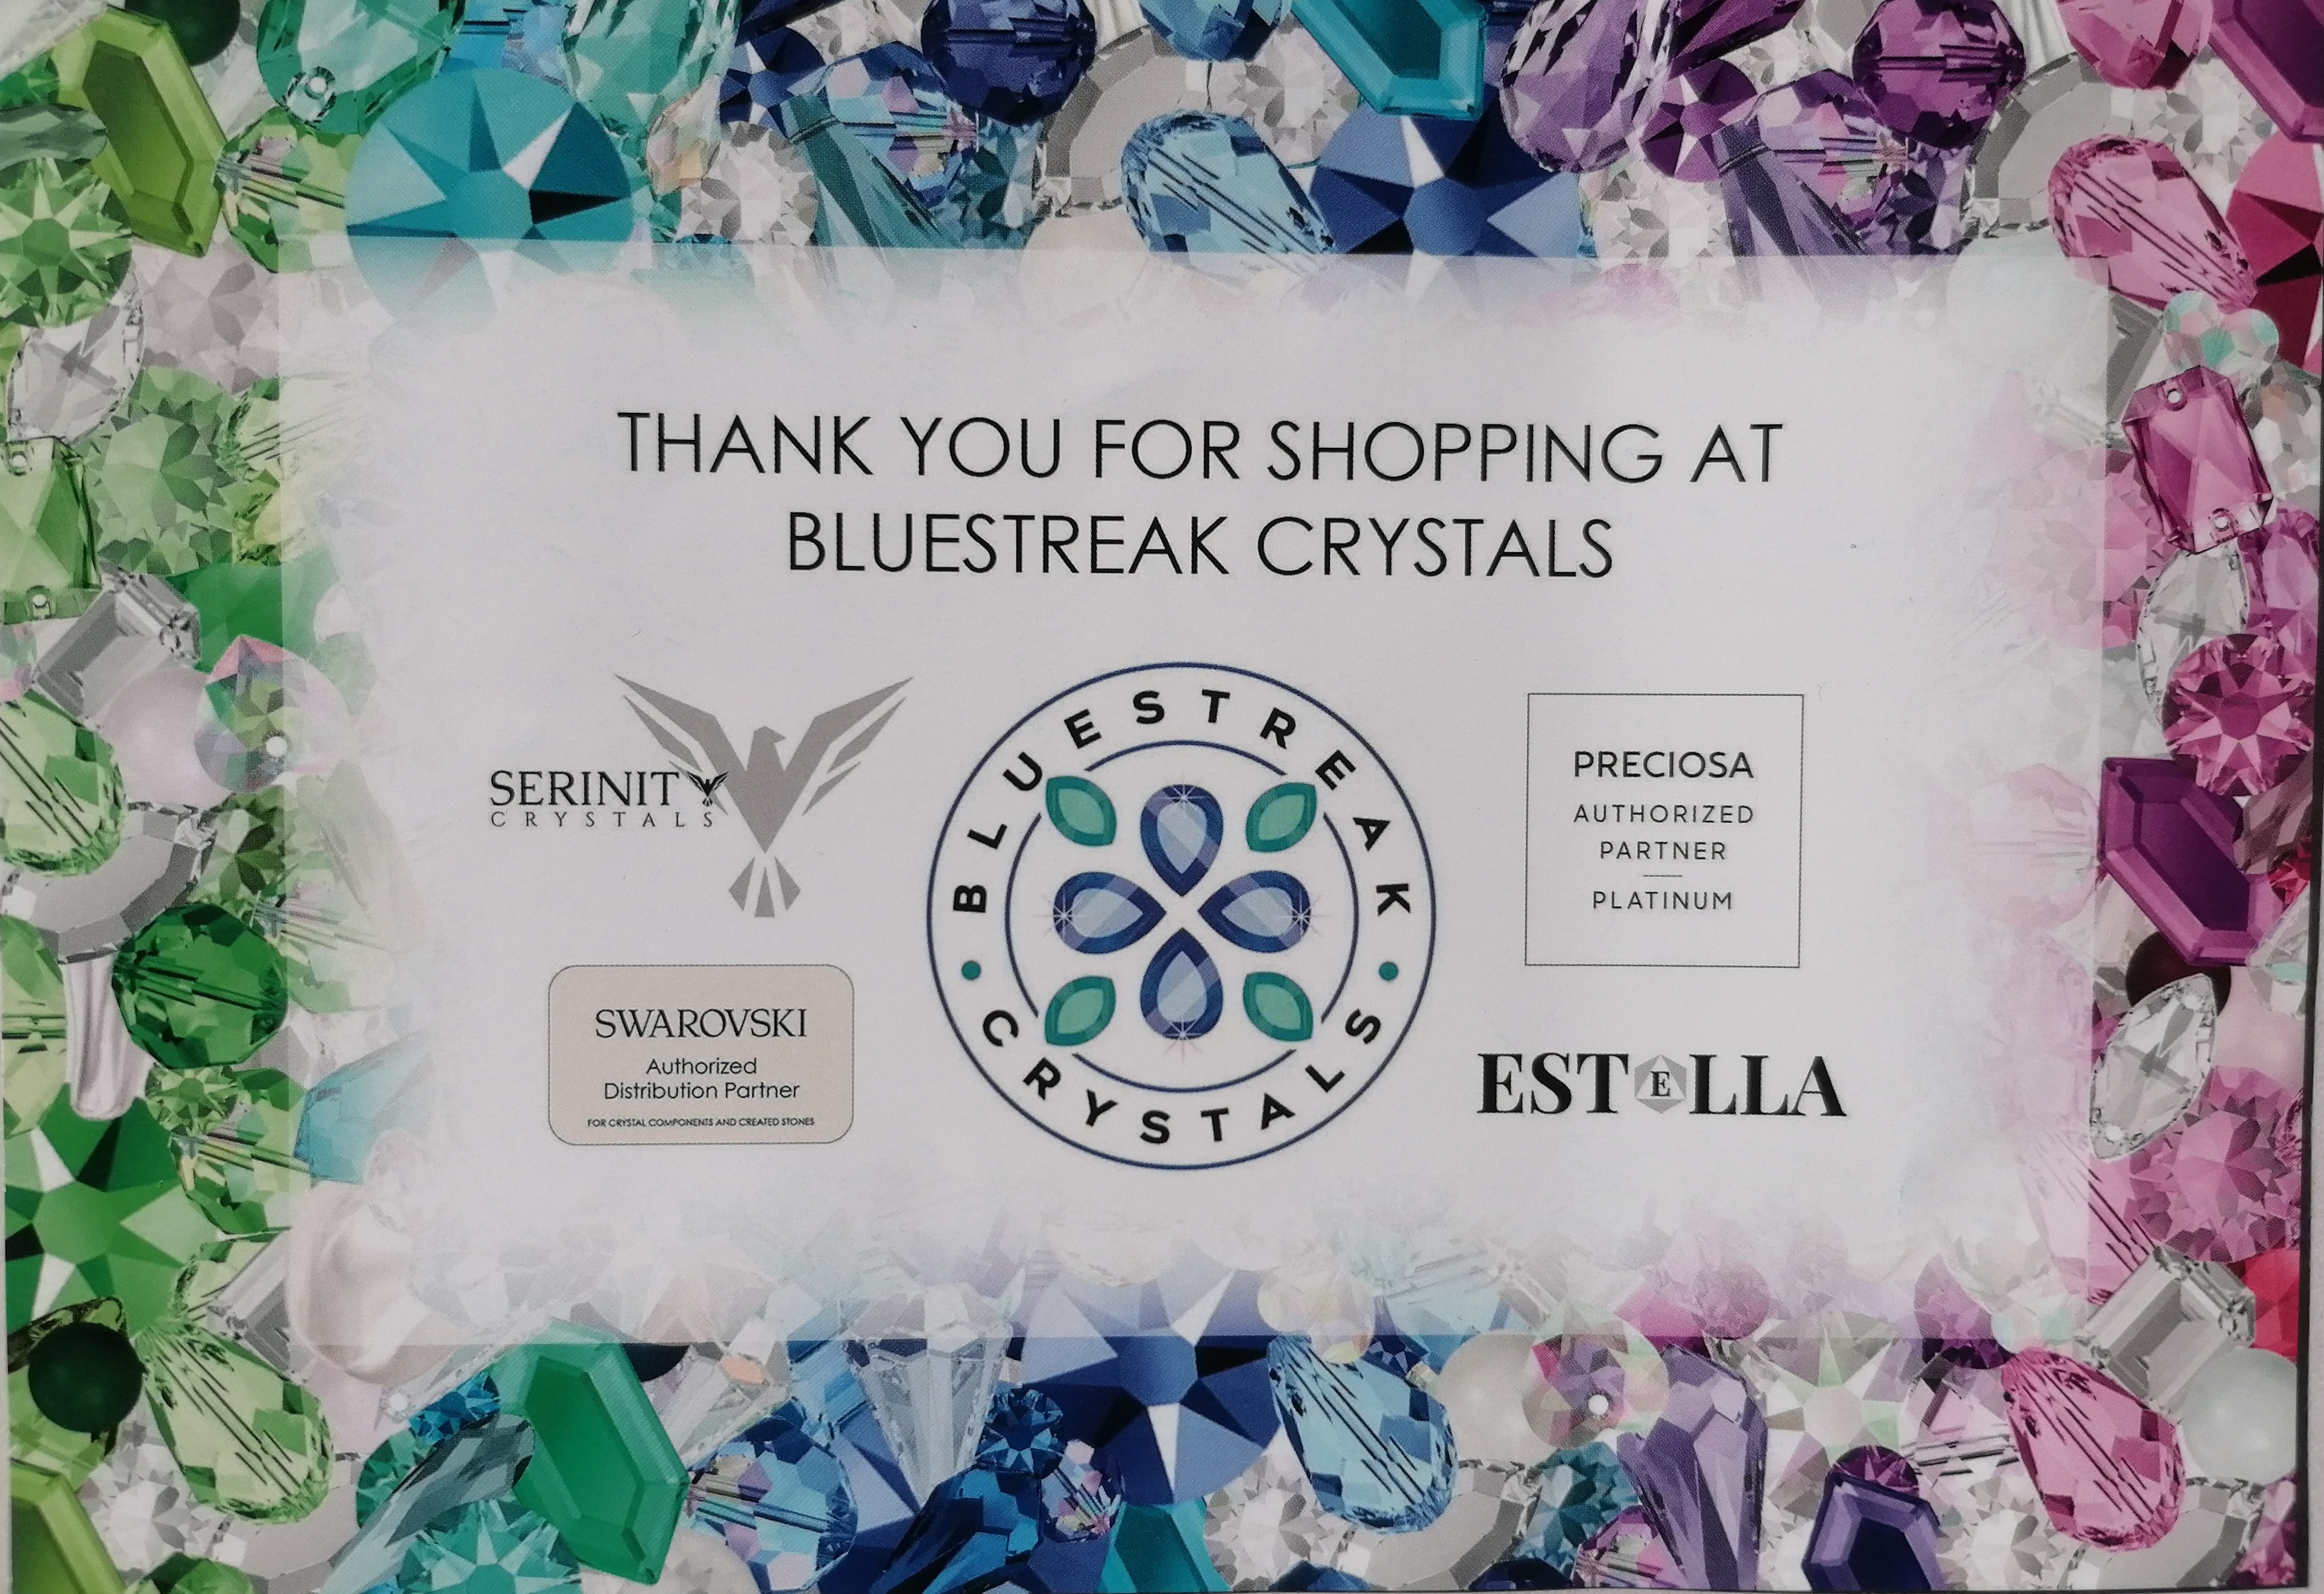 Since this year we have been using: Crystals from these partners